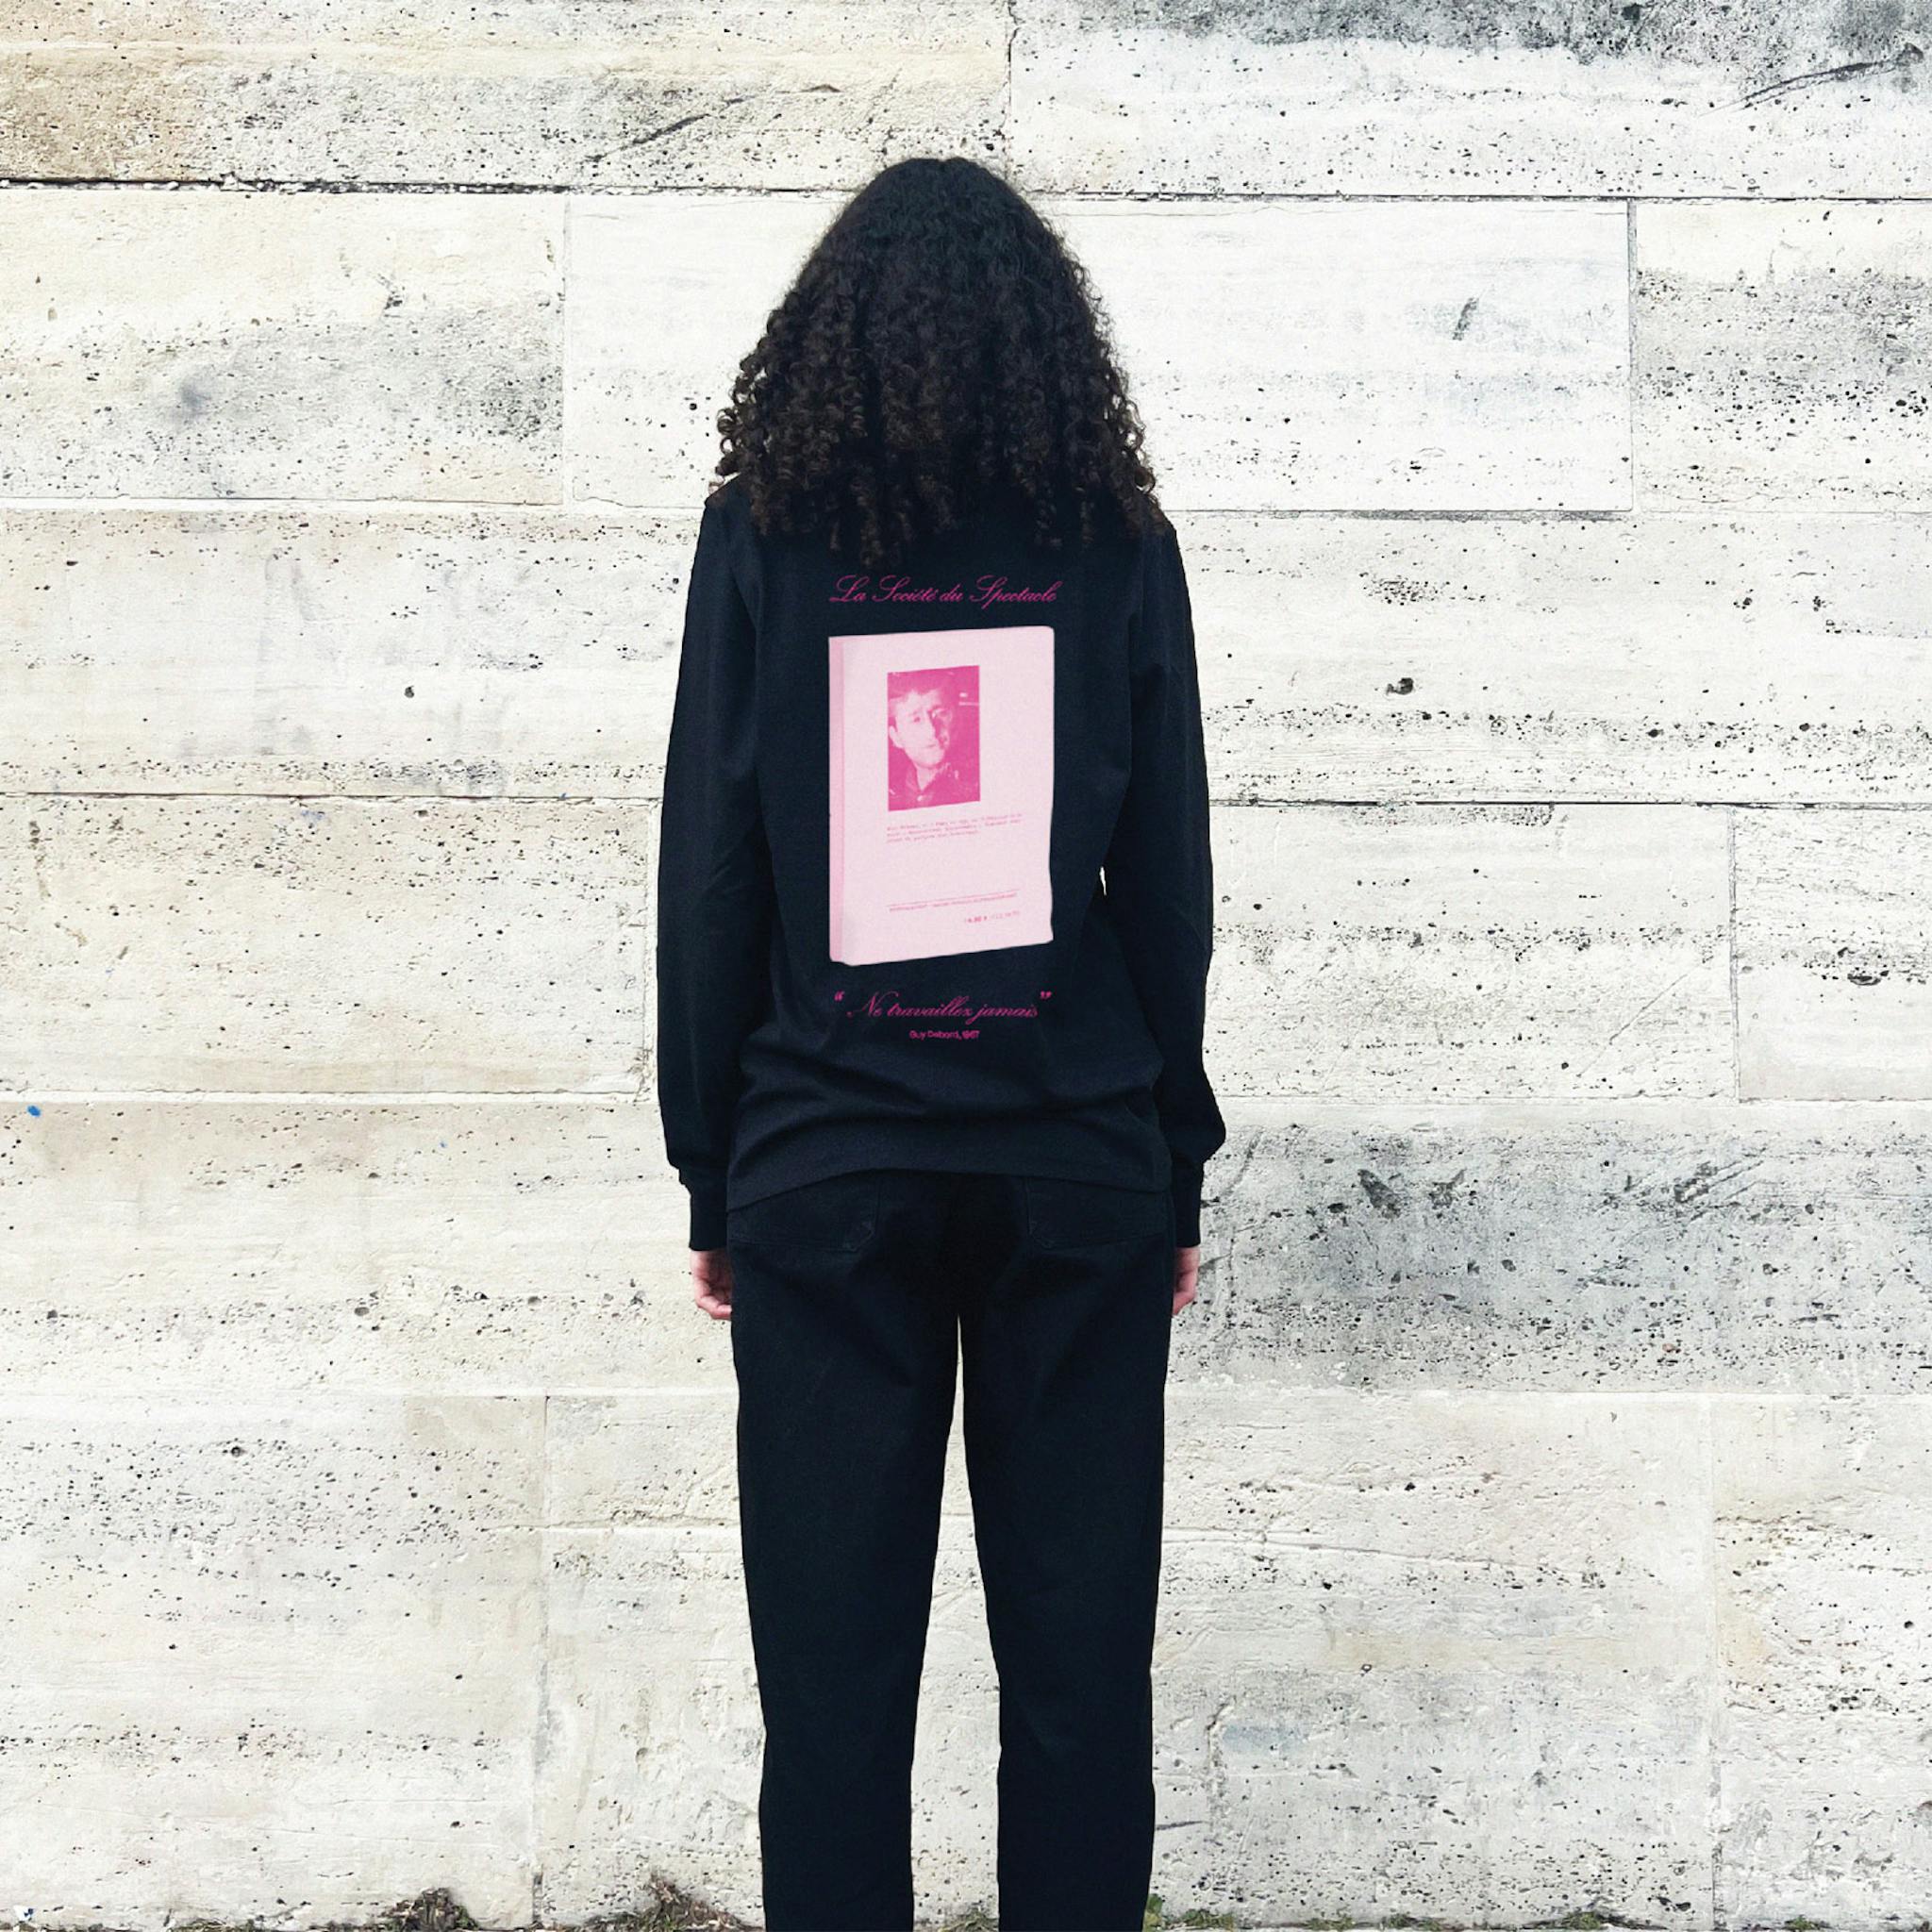 A woman with long dark hair wearing a black long-sleeve T-shirt with large pink book graphic on the back and french words over and underneath.